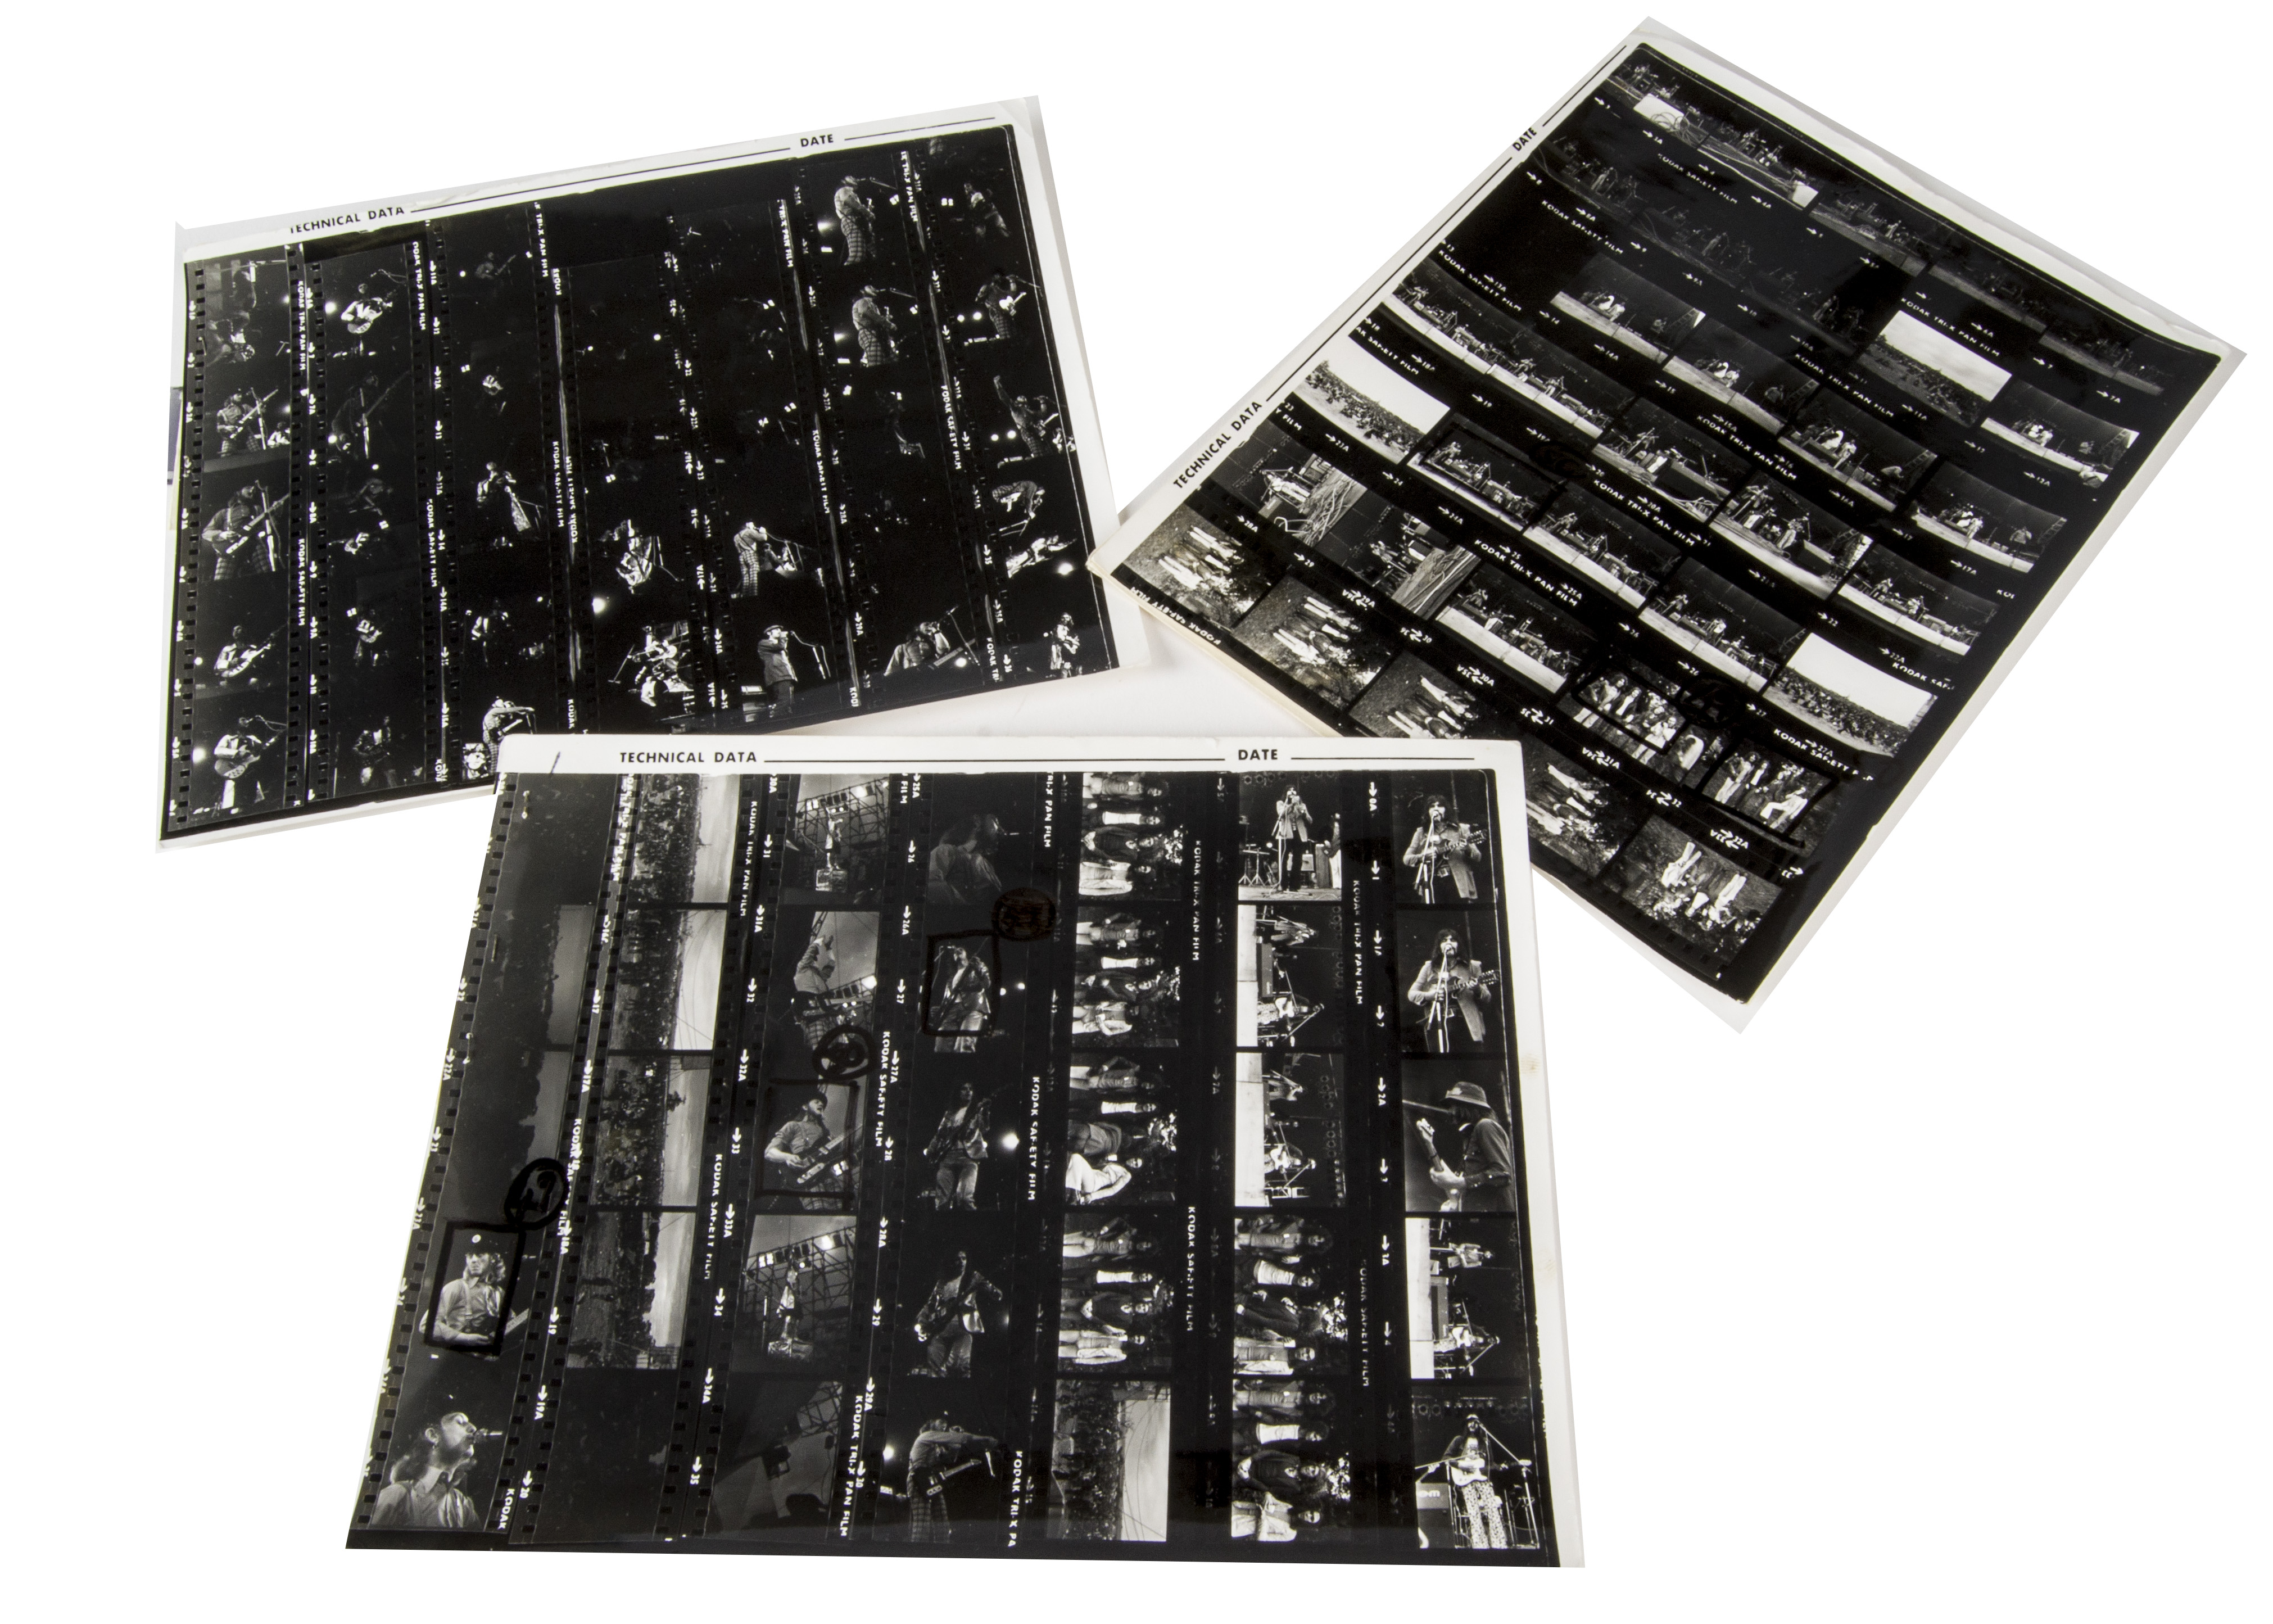 Slade, three sets of proof photographs with negatives of Slade performing at 'The Great Western